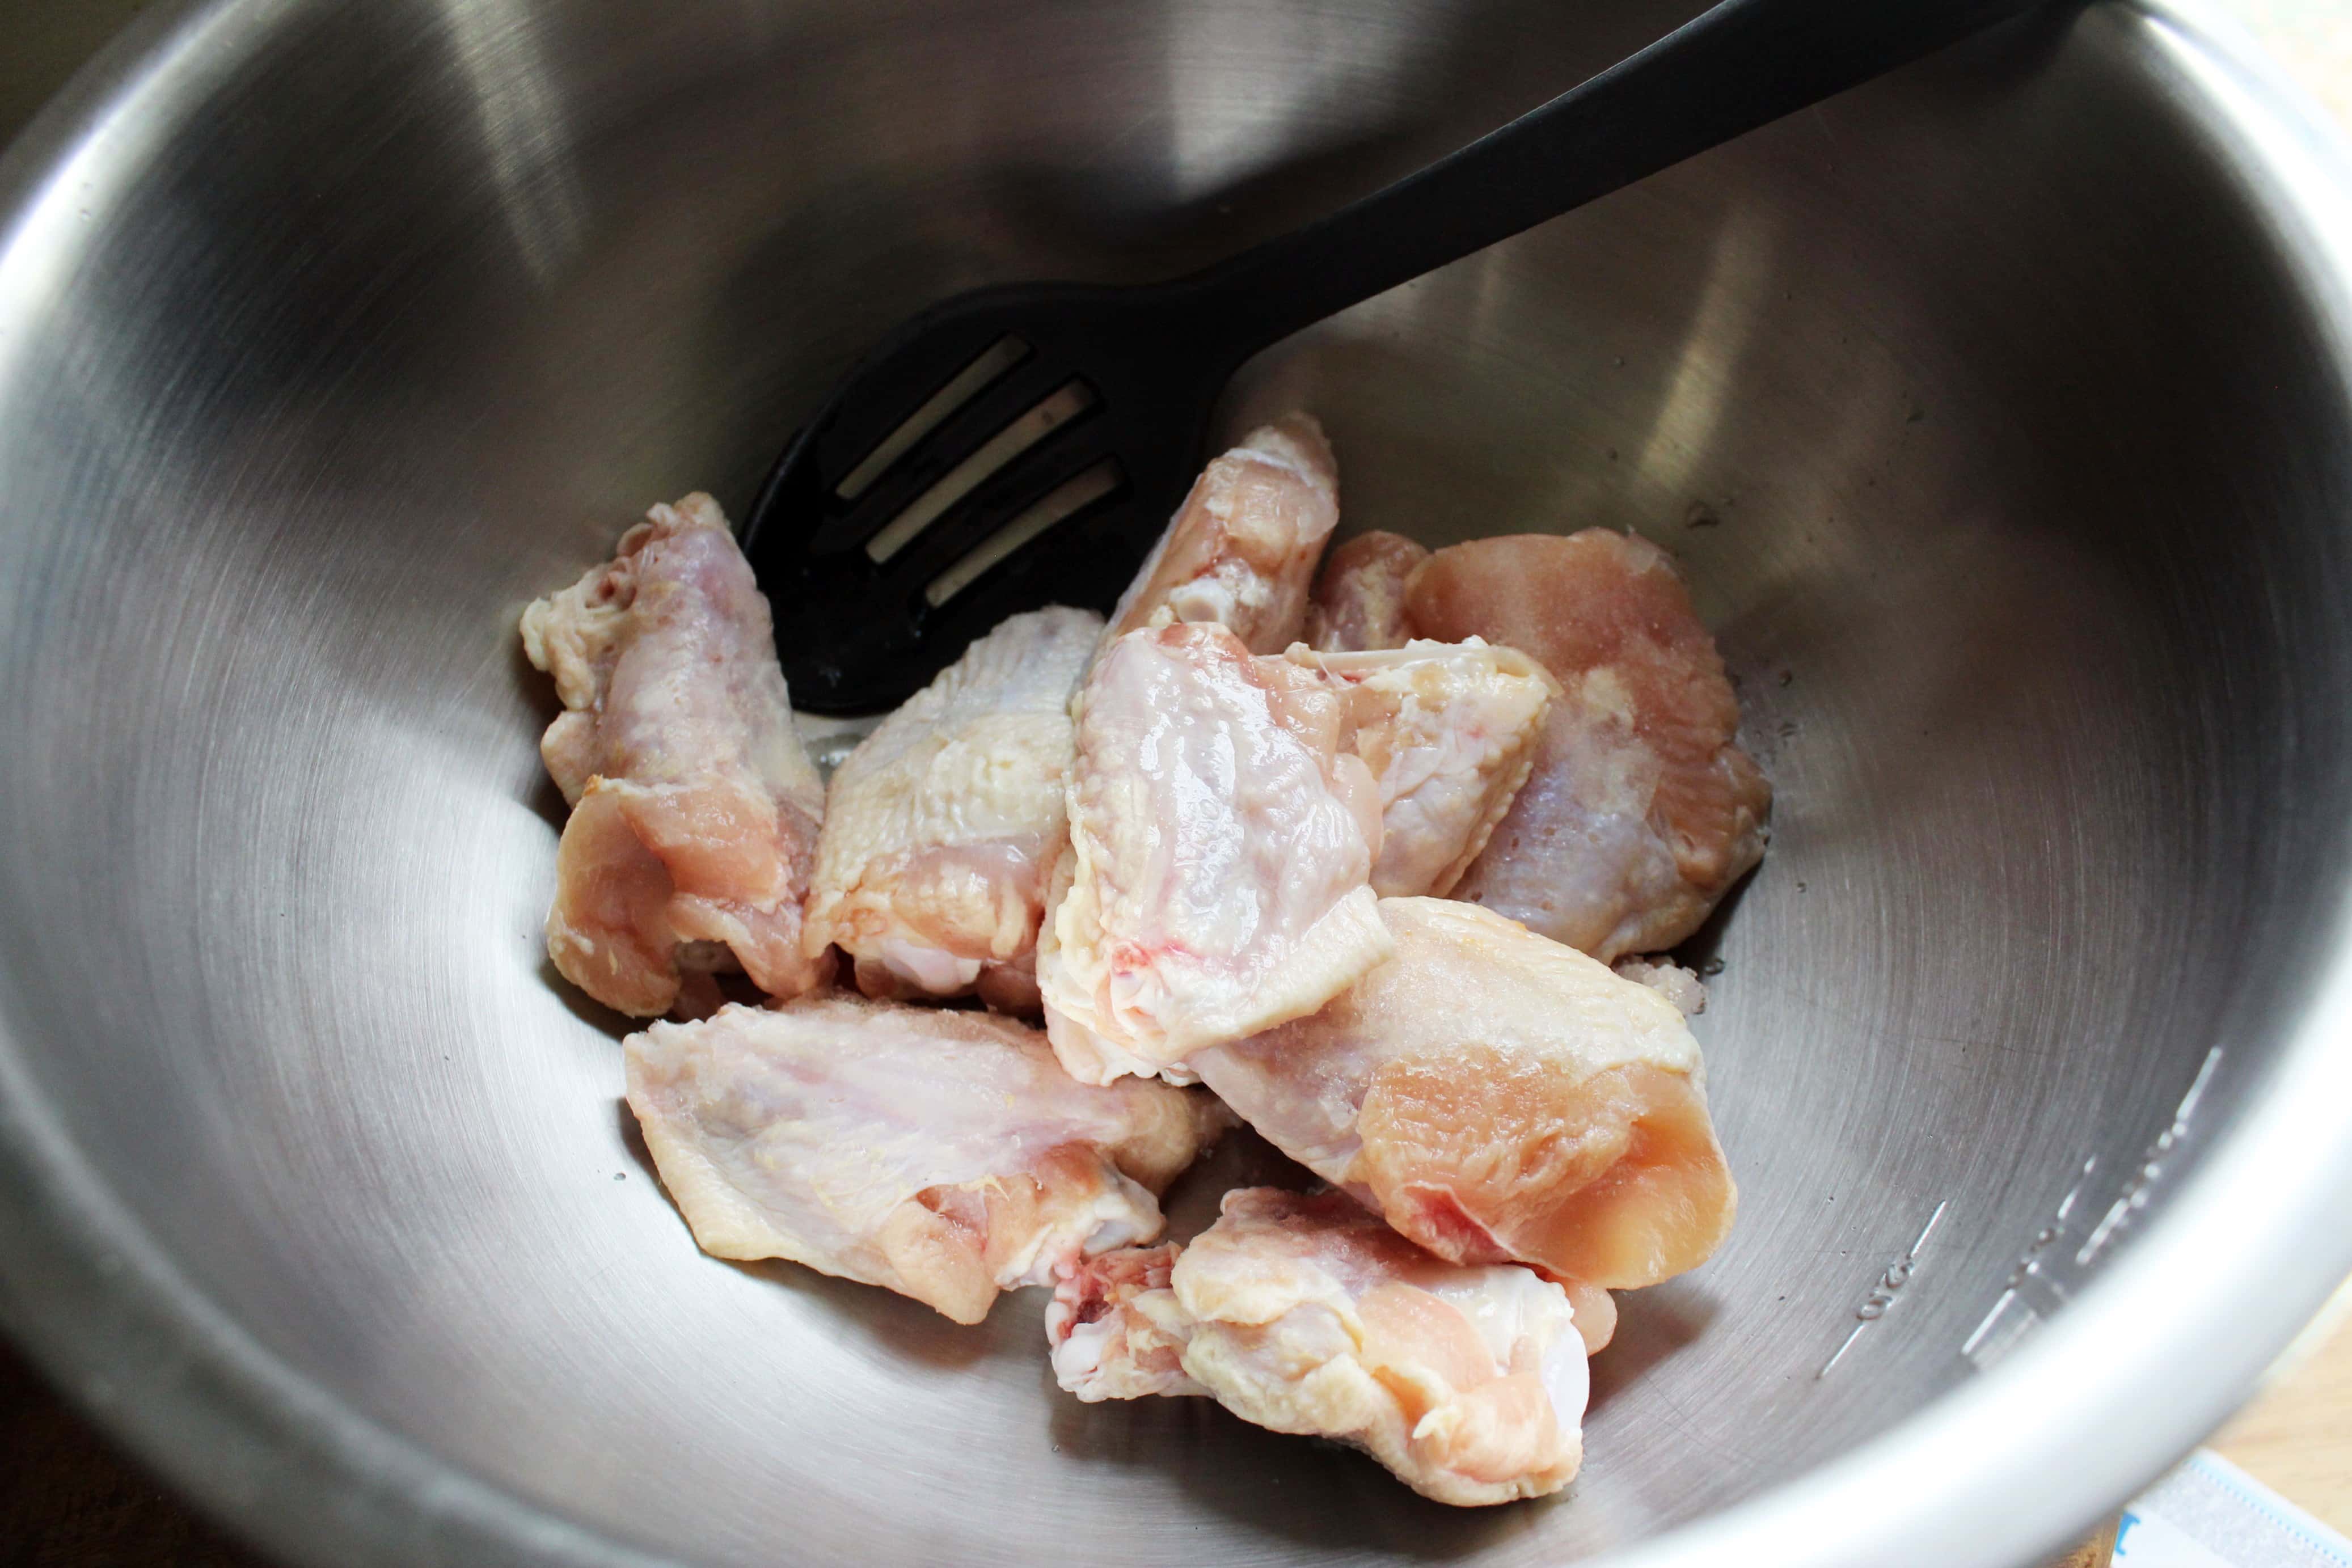 stainless steel bowl with raw chicken wing pieces.